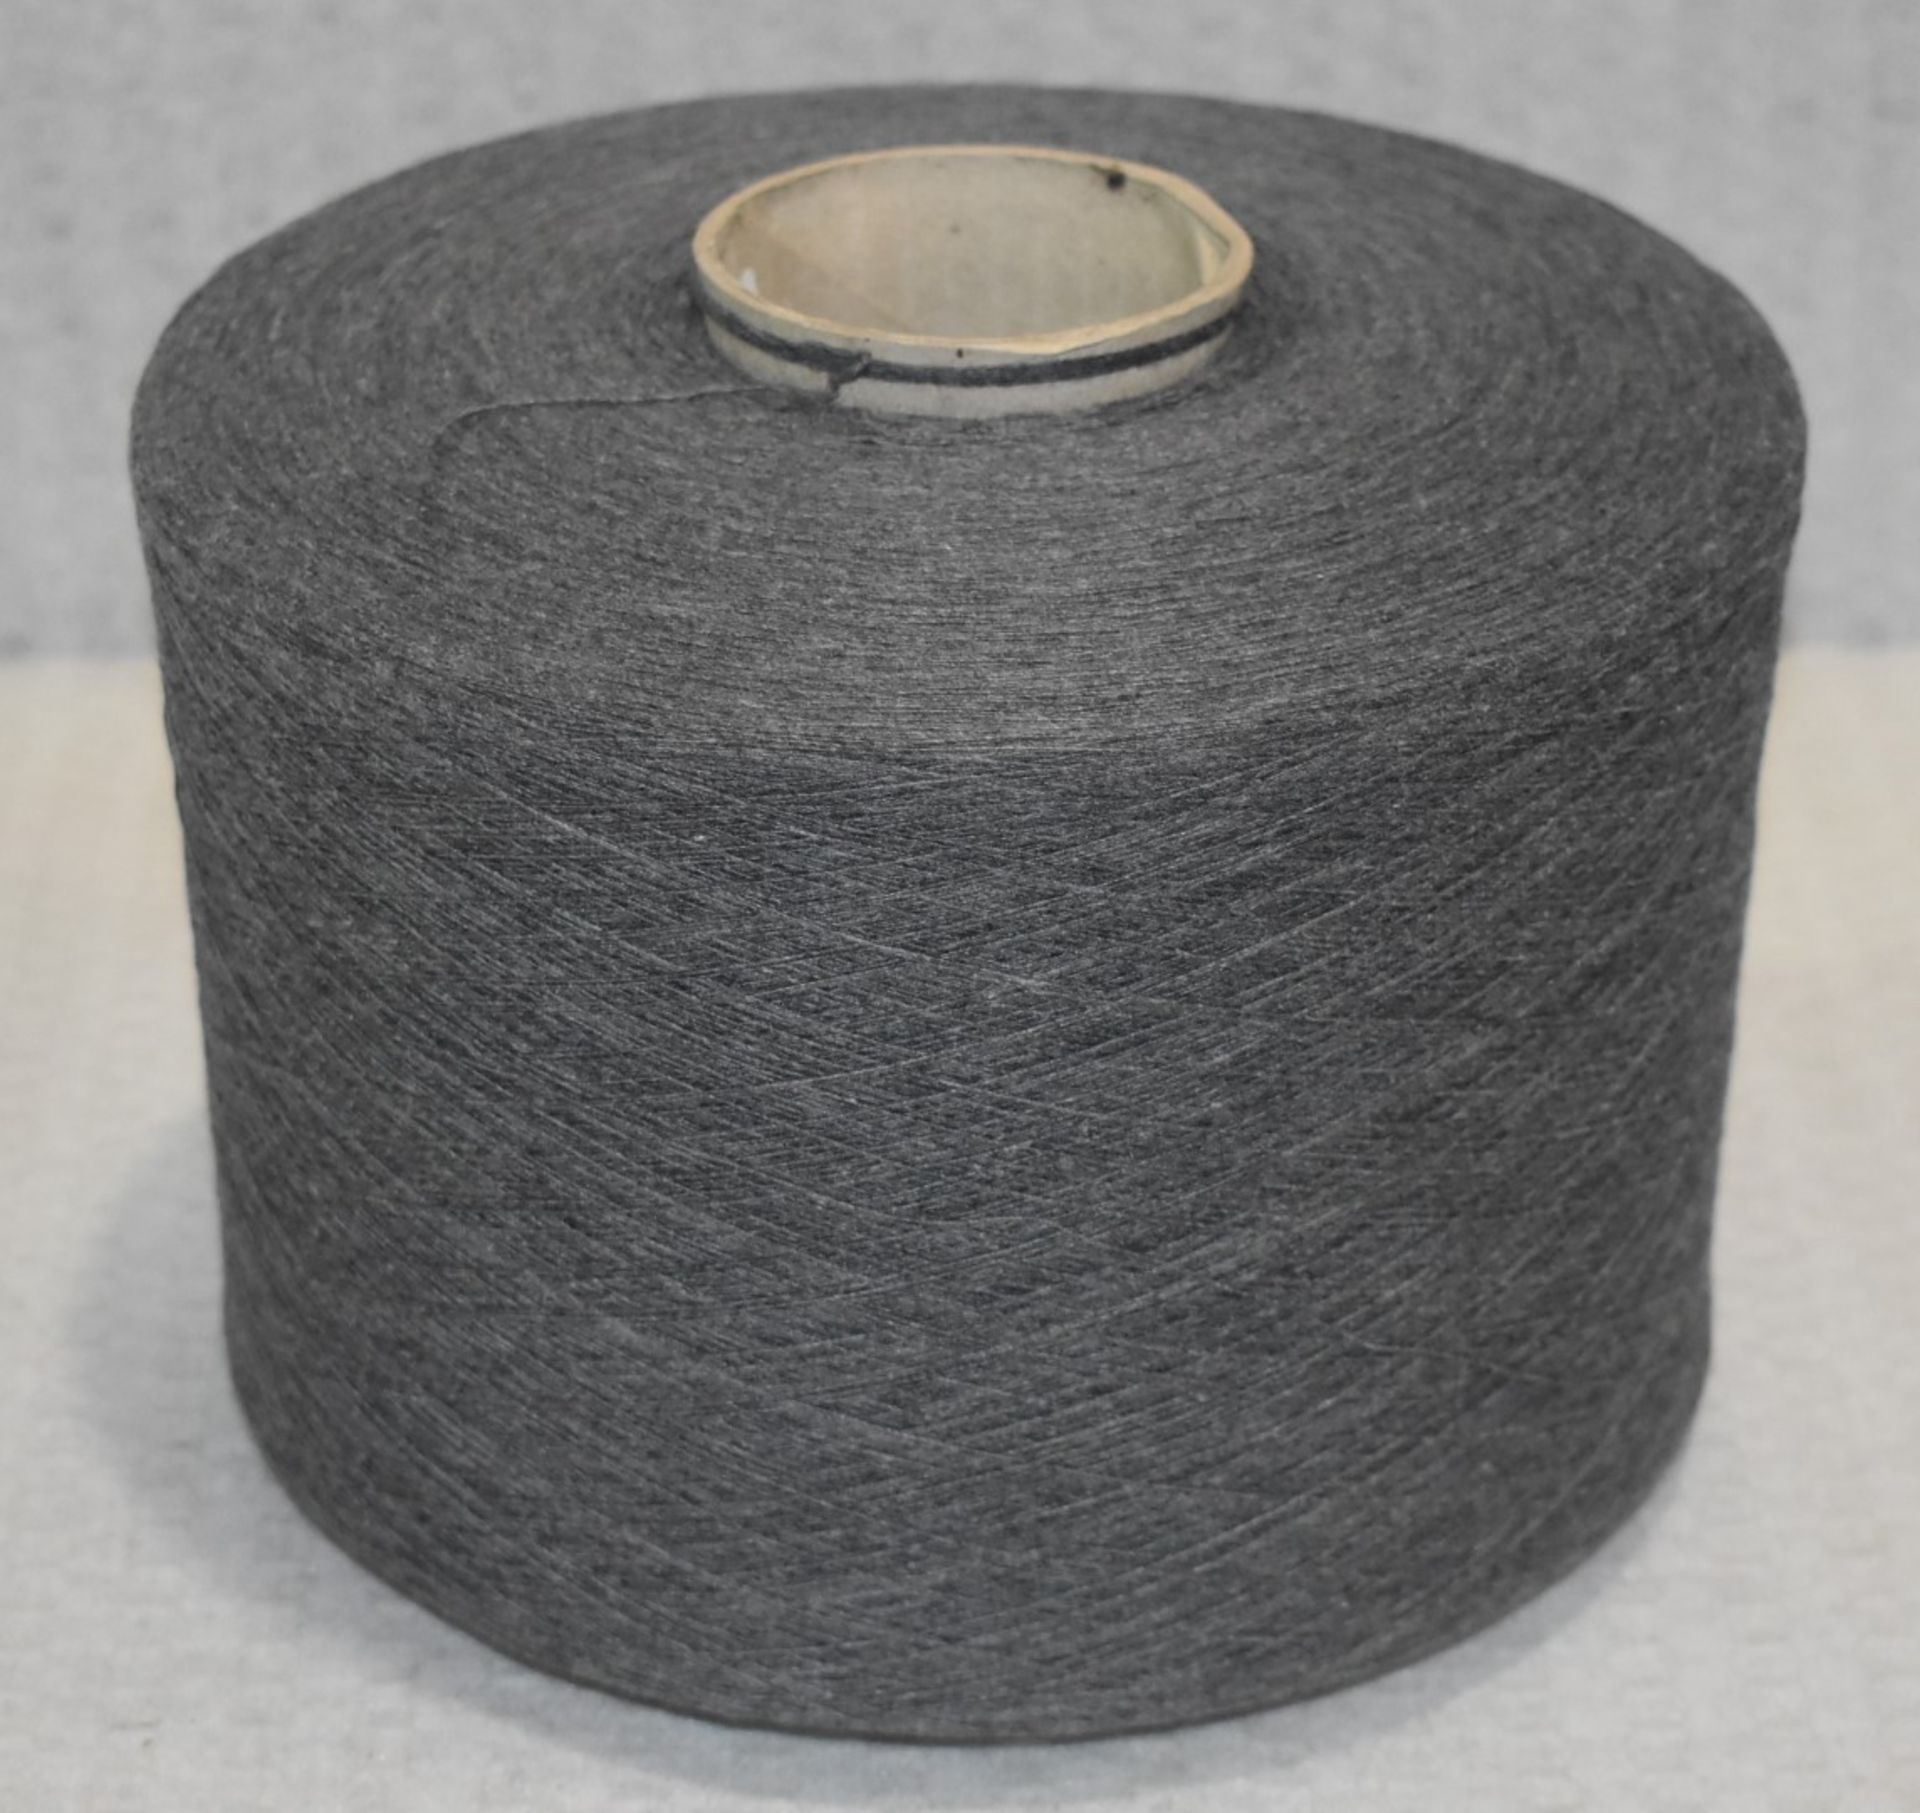 18 x Cones of 1/13 MicroCotton Knitting Yarn - Mid Grey - Approx Weight: 2,500g - New Stock ABL Yarn - Image 7 of 10